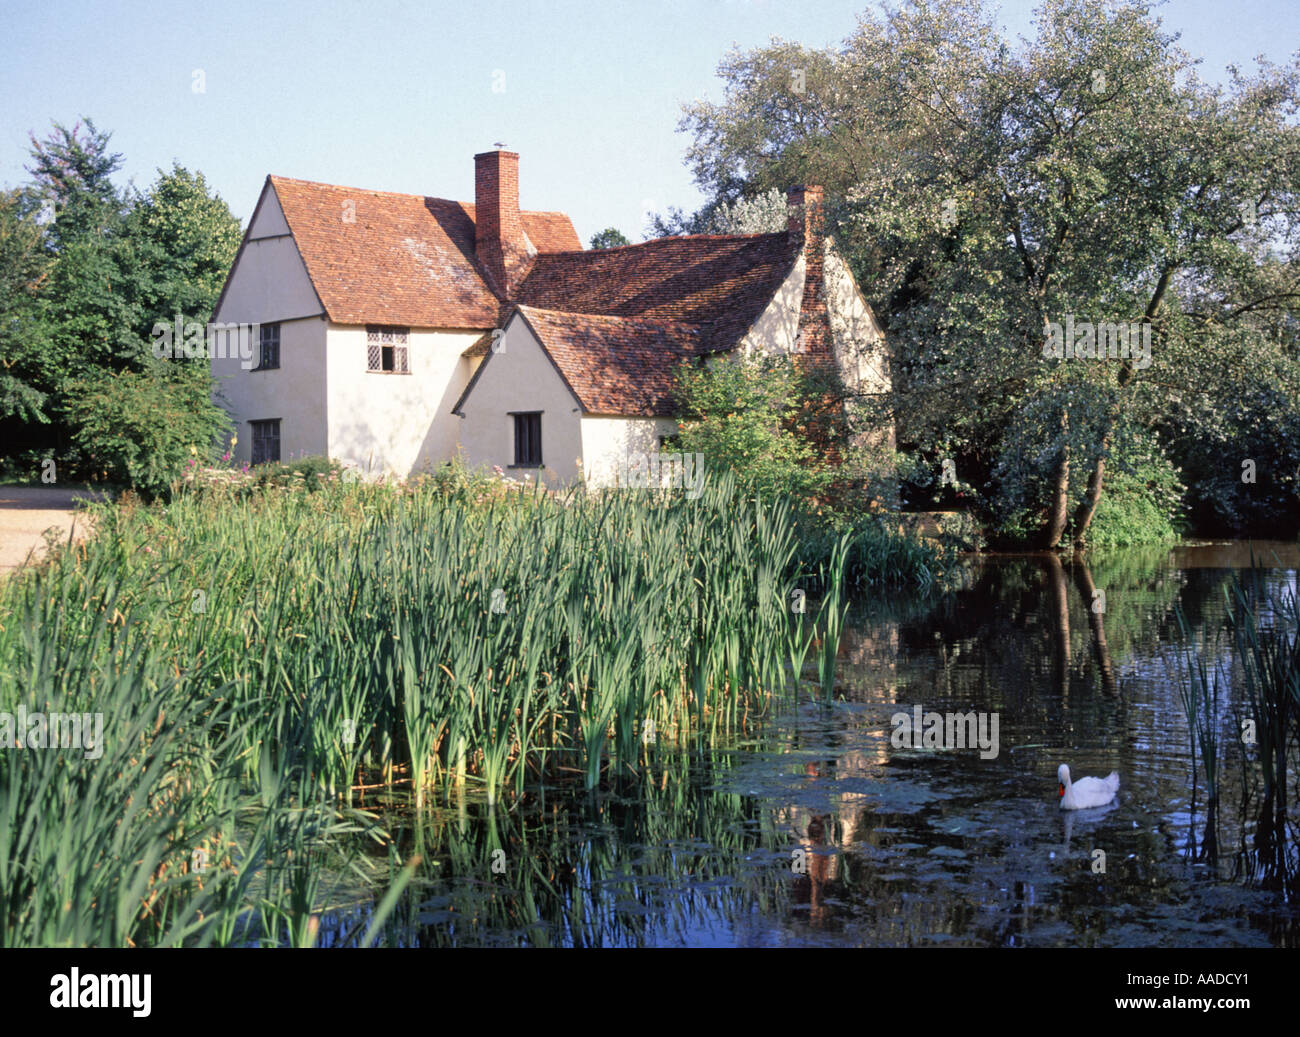 Willy Lotts Dedham Vale cottage an old house & swan on River Stour in Flatford used in John Constable Hay Wain painting Suffolk East Anglia England UK Stock Photo